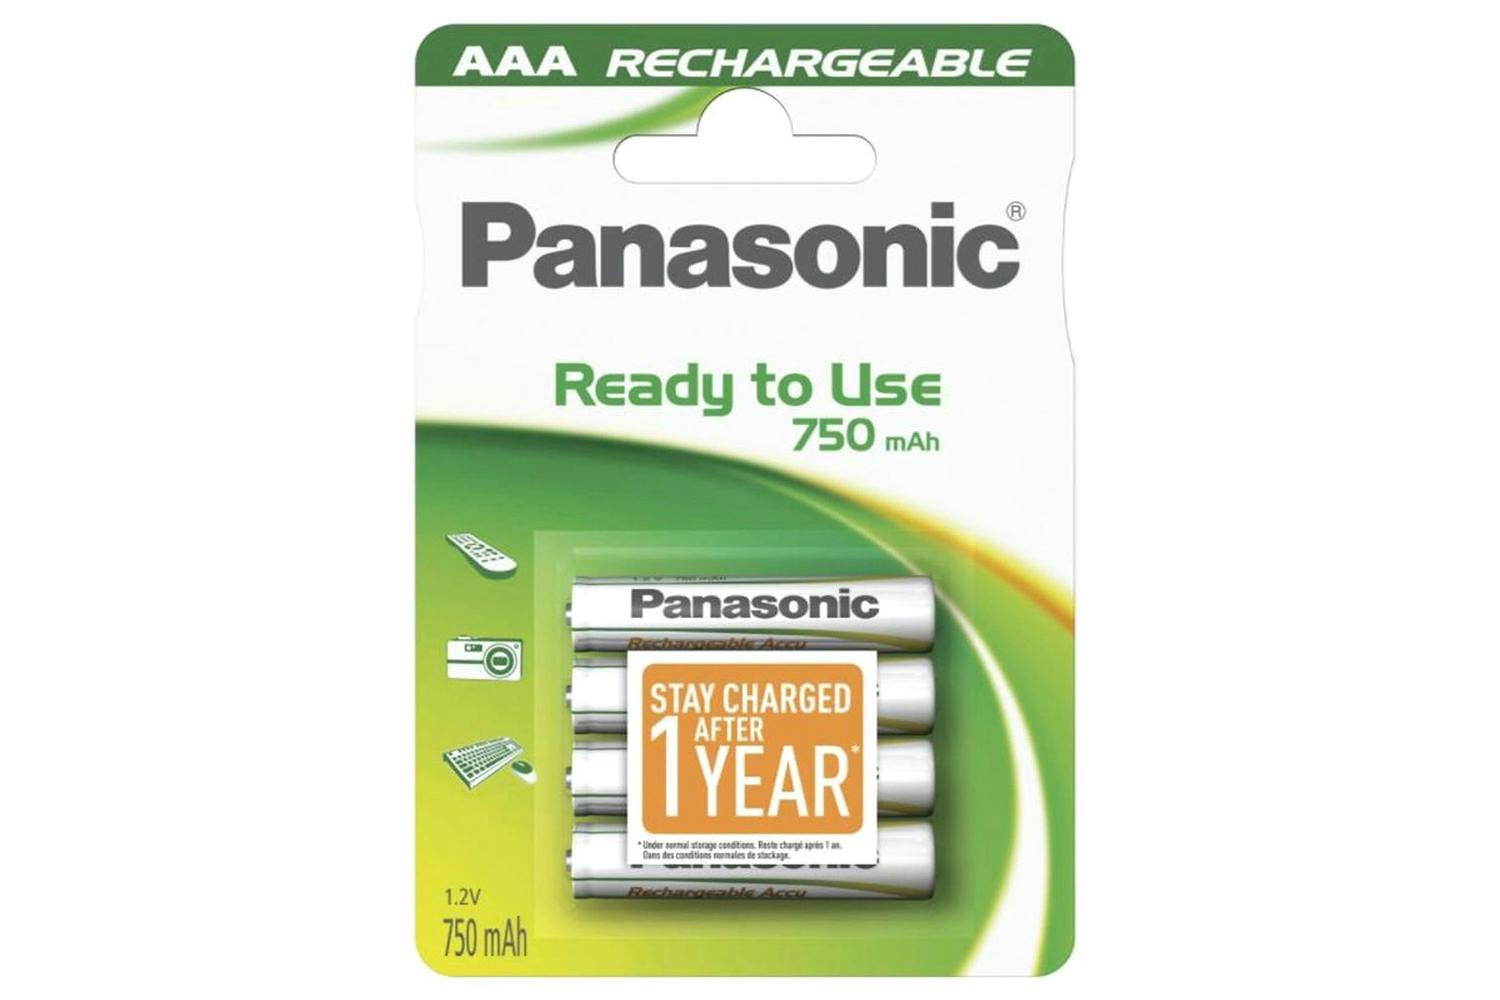 Panasonic AAA Rechargeable Battery | 4 Pcs of Pack